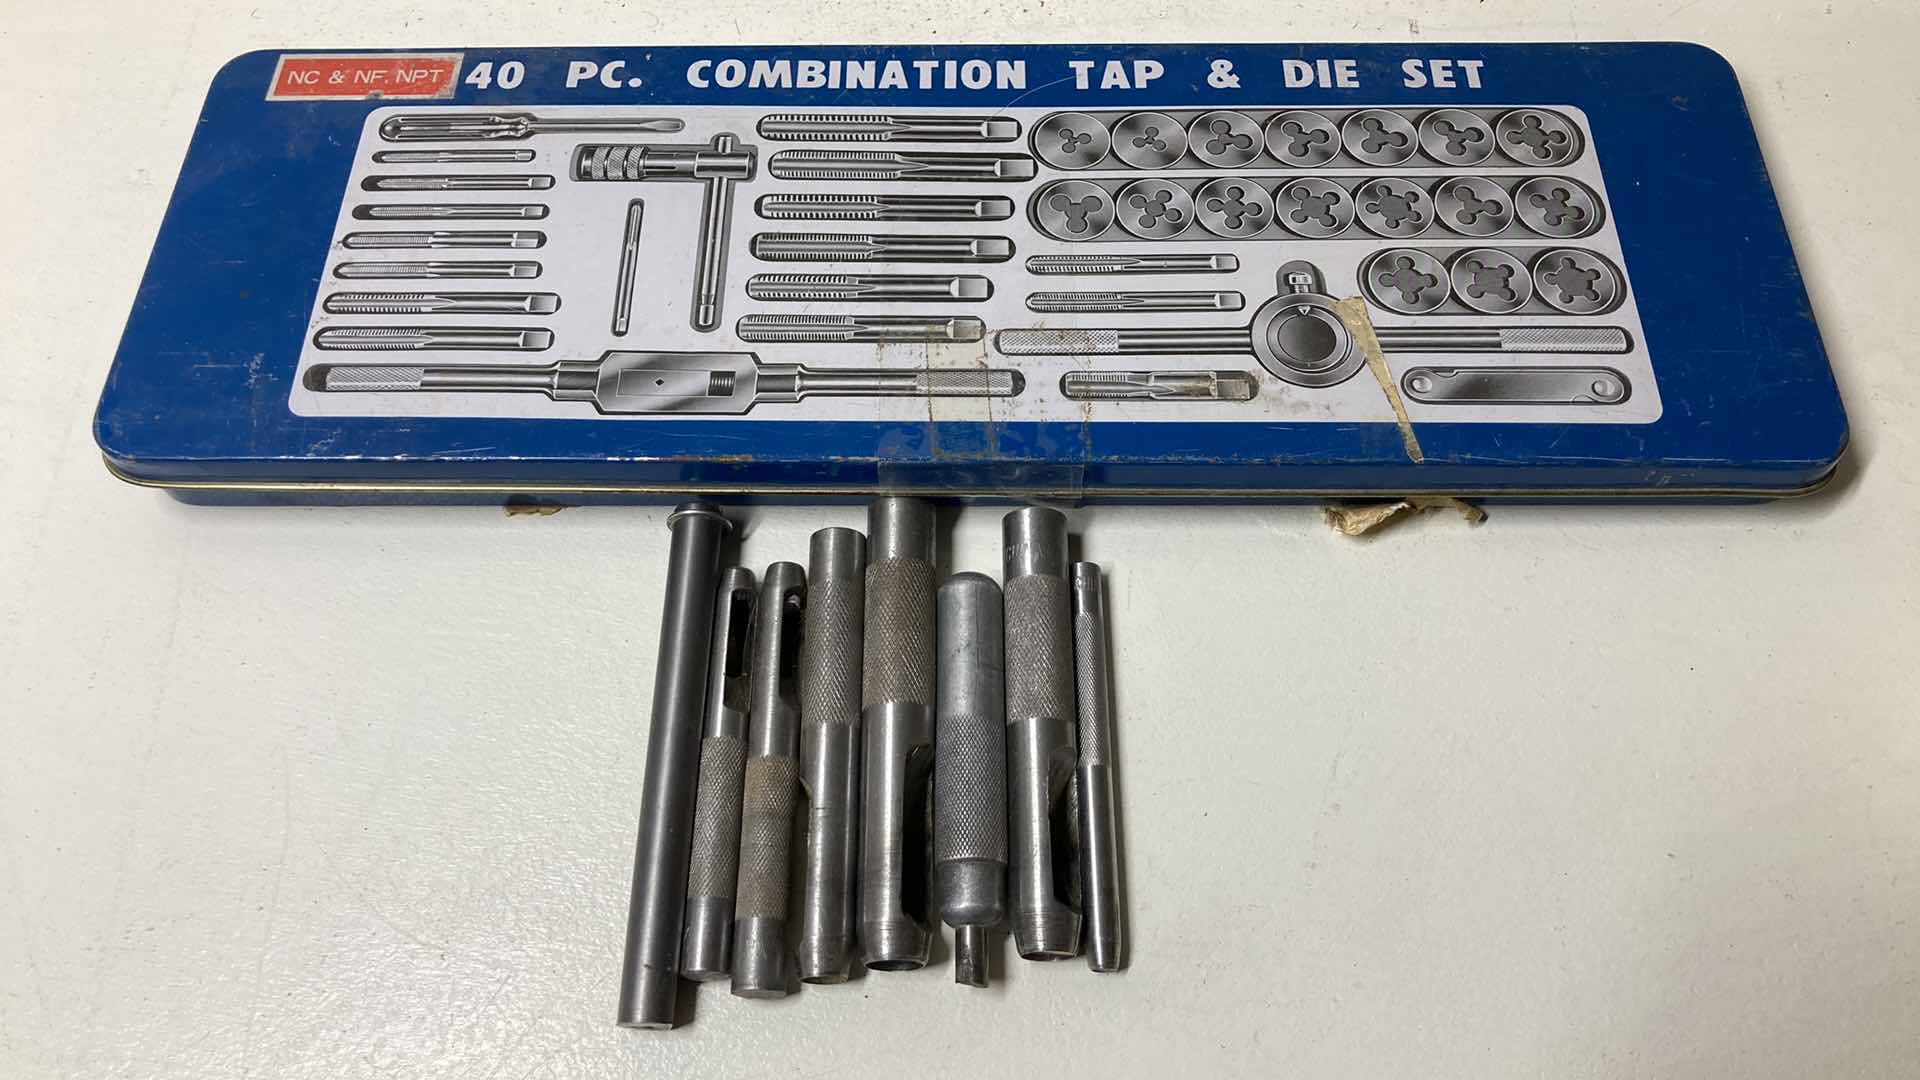 Photo 1 of NC & NF.NPT COMBO TAP & DIE SET W TIN CASE & EXTRA BITS